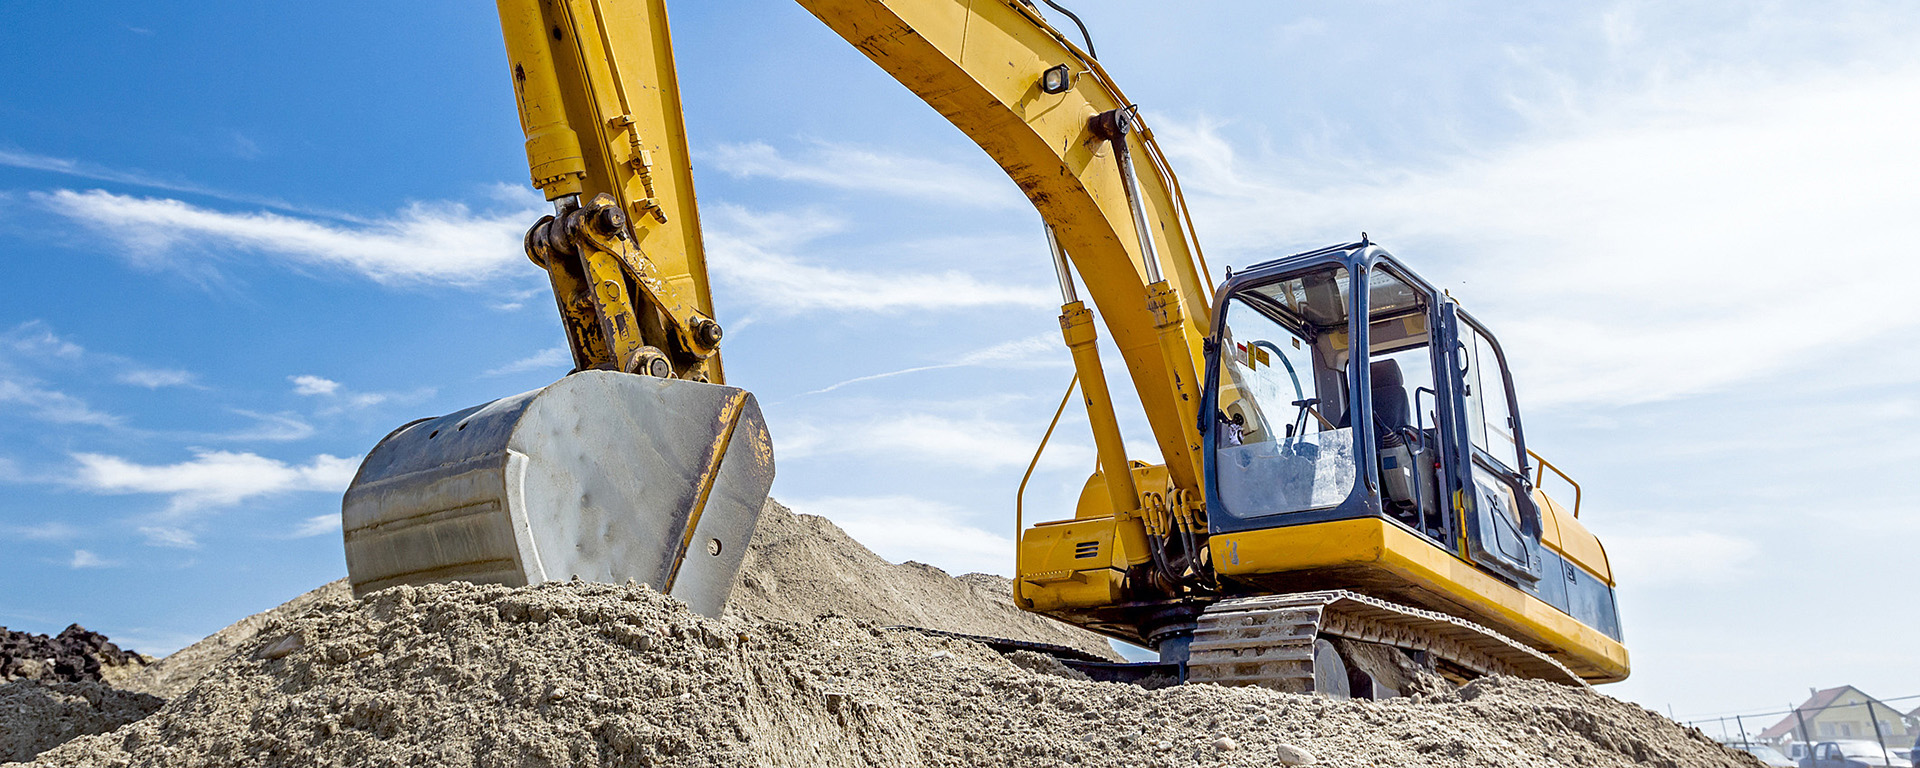 Yellow excavator digging in the dirt with a blue sky in the background 